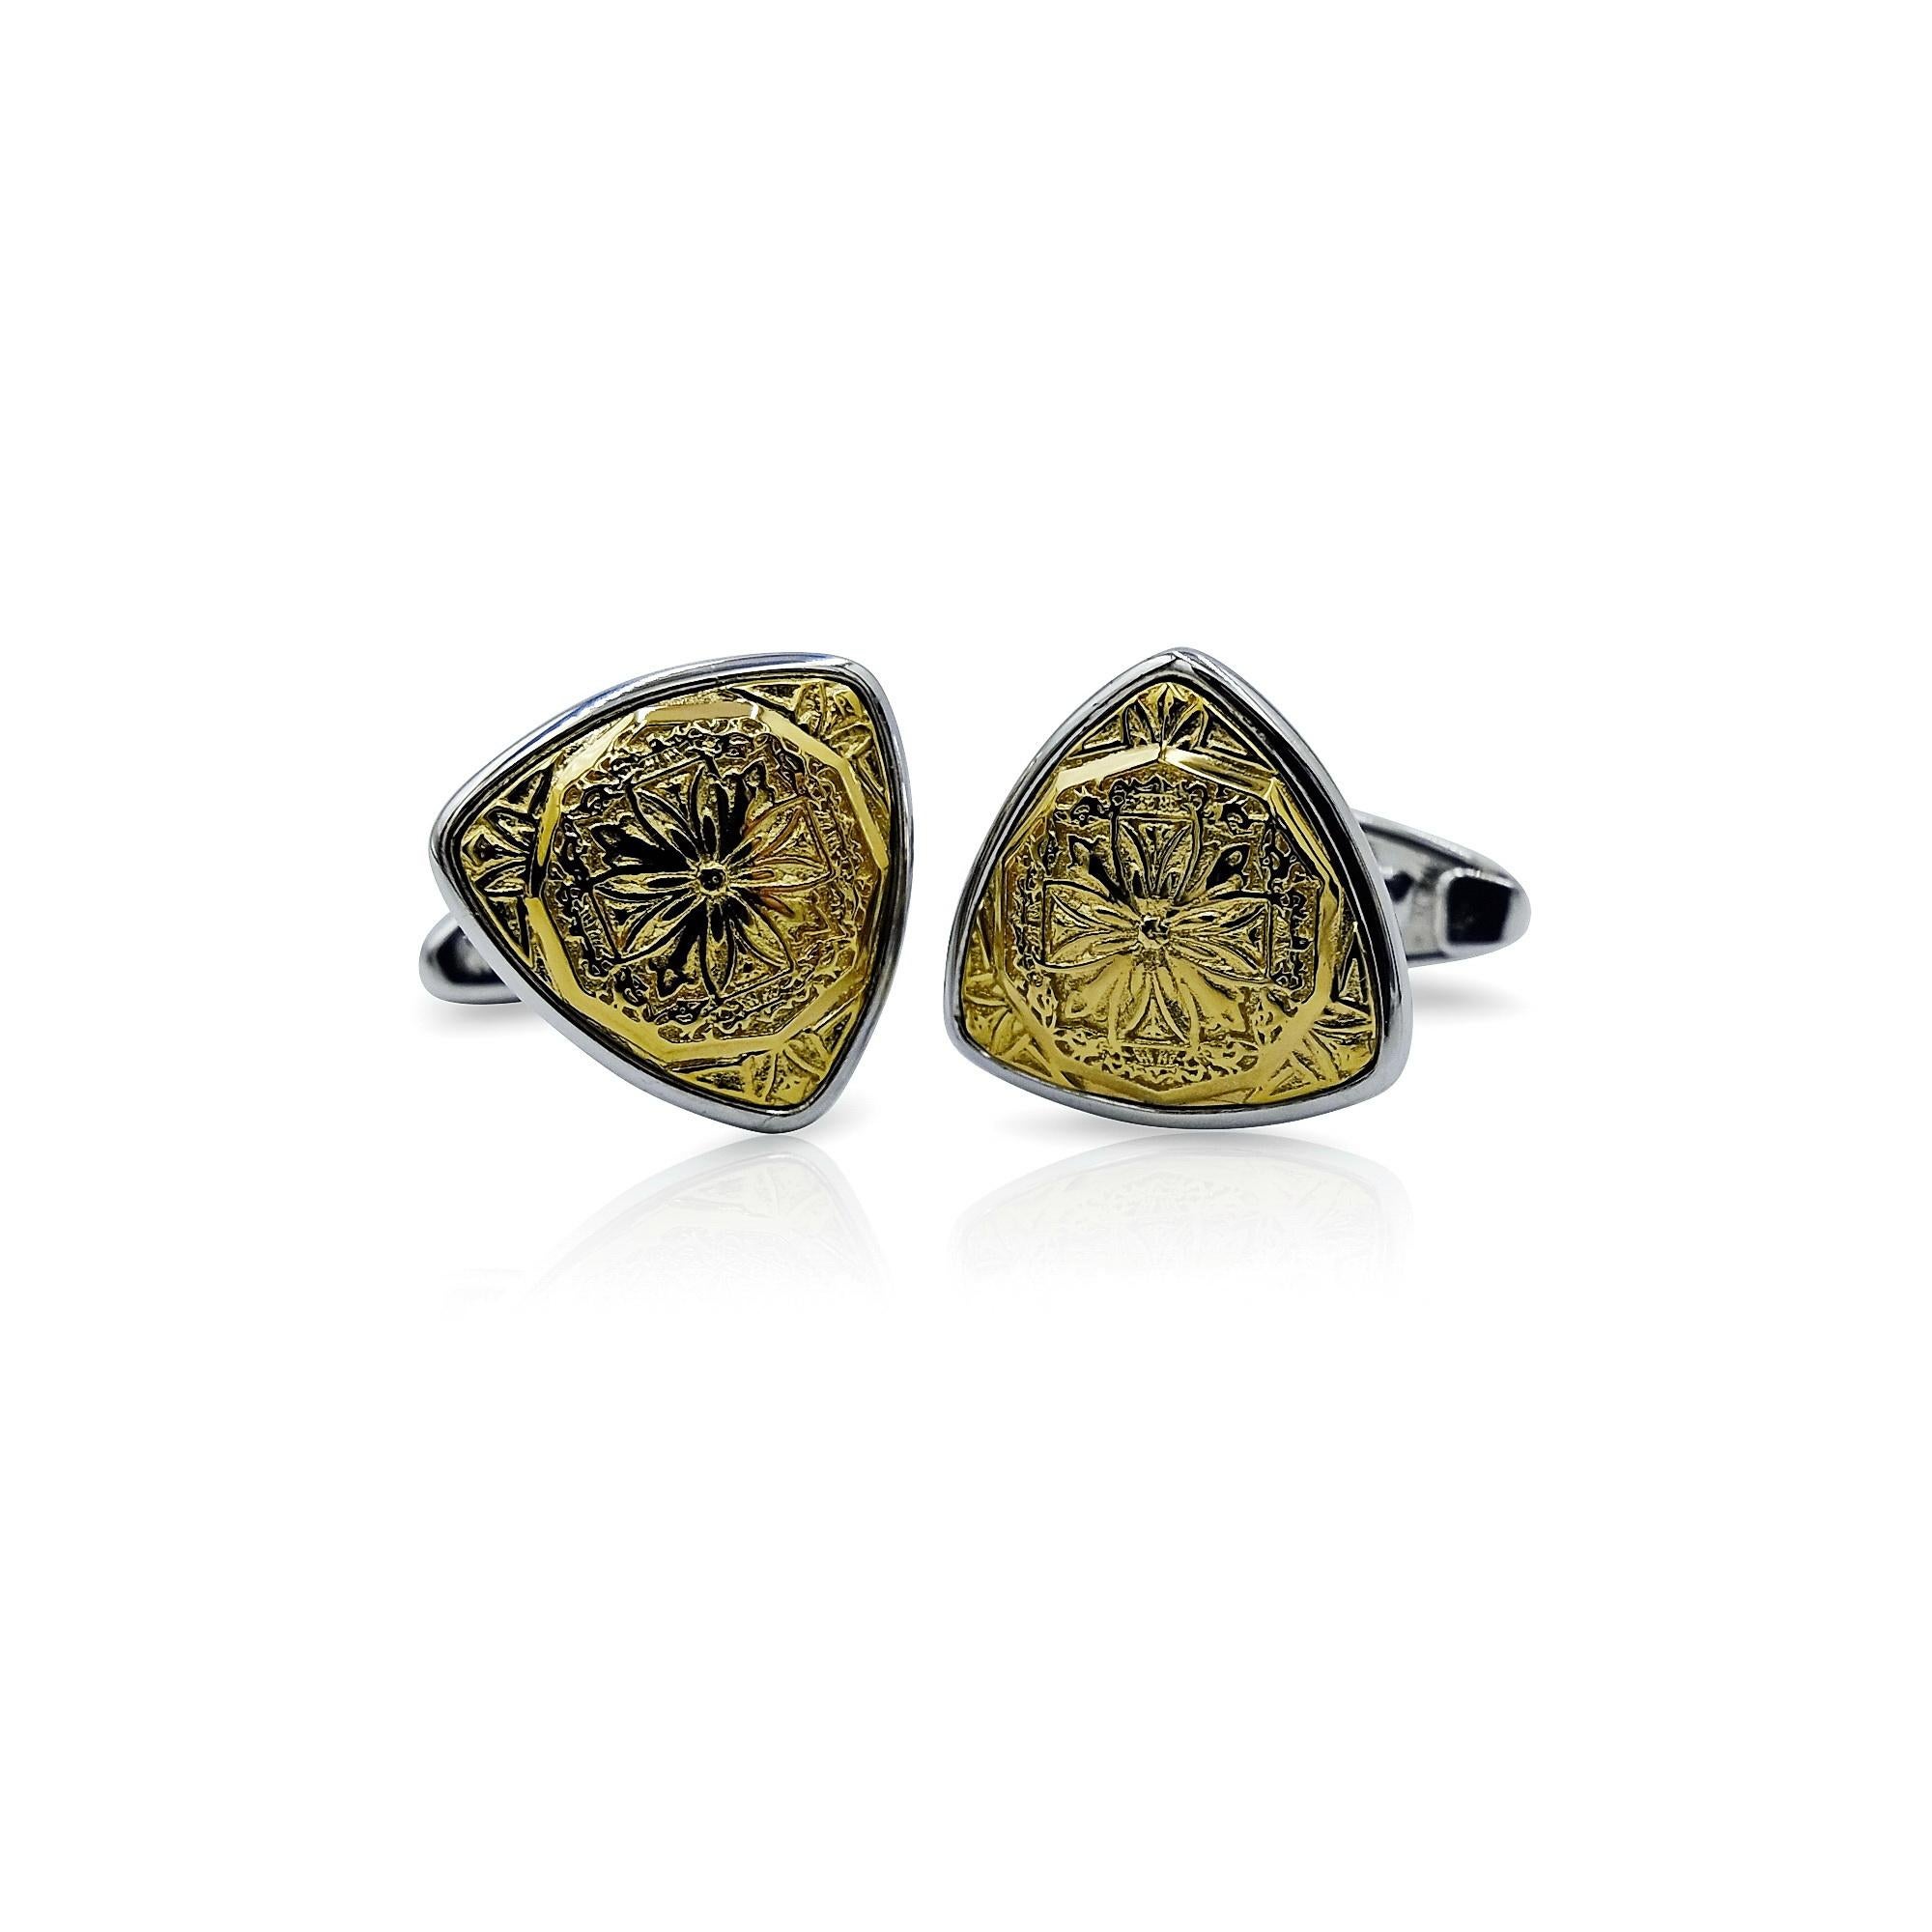 Luca Jouel Decorative Cufflinks Trio in Yellow Gold and Silver For Sale 2